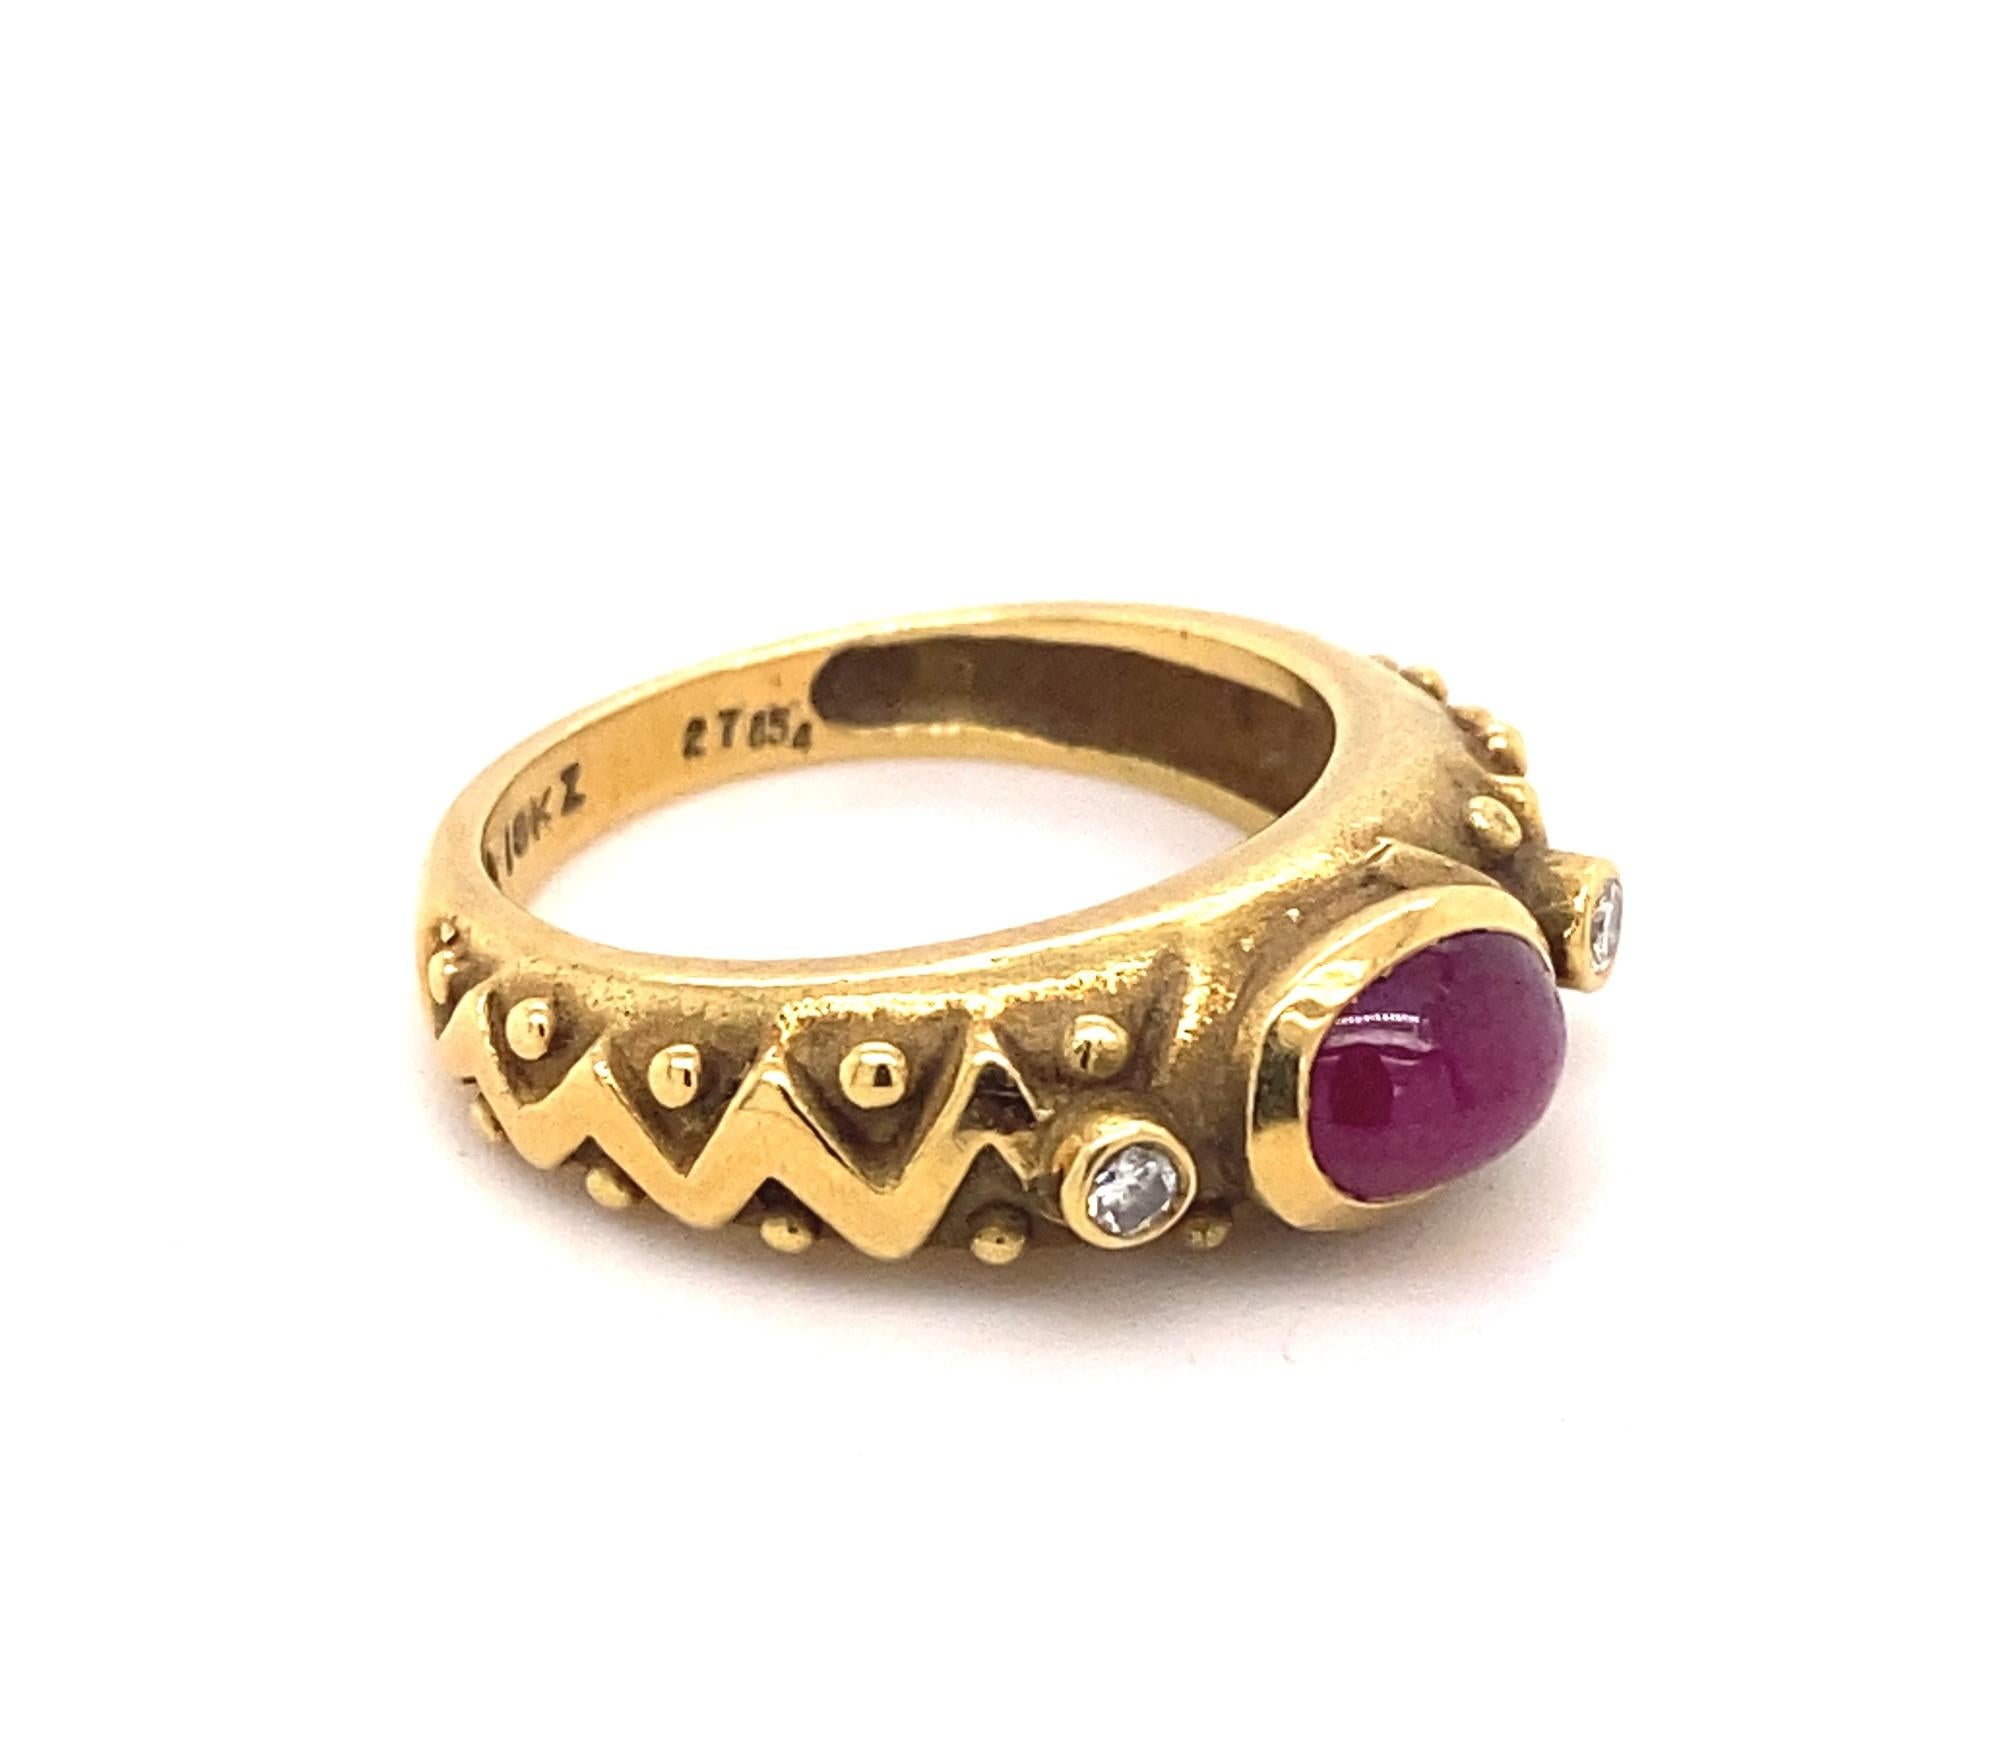 This is a beautiful vintage 18k yellow gold ring with a natural cabochon ruby and two diamonds.  The ring has a unique zig zag pattern on the shank.  The cabochon ruby has nice deep red color and good clarity. Two diamonds are I color VS-2 clarity